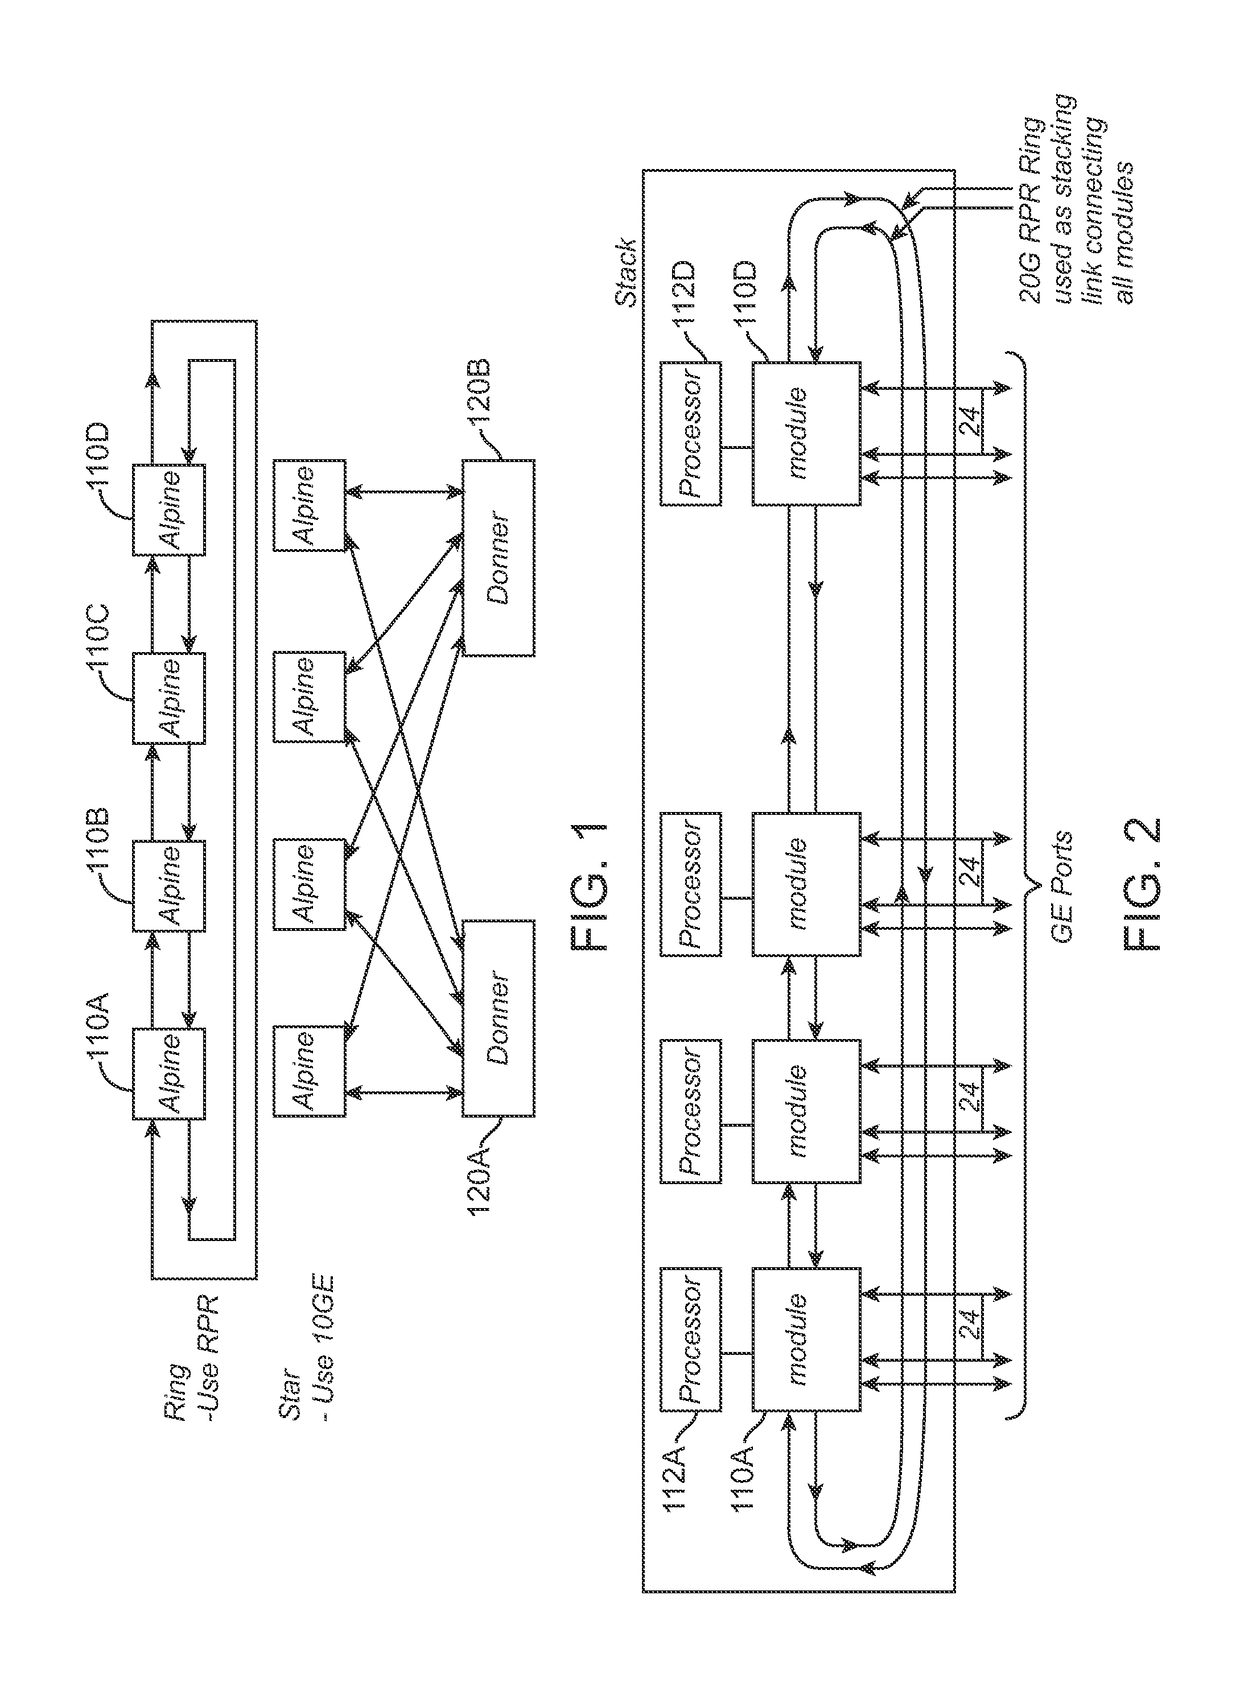 Stacked network switch using resilient packet ring communication protocol